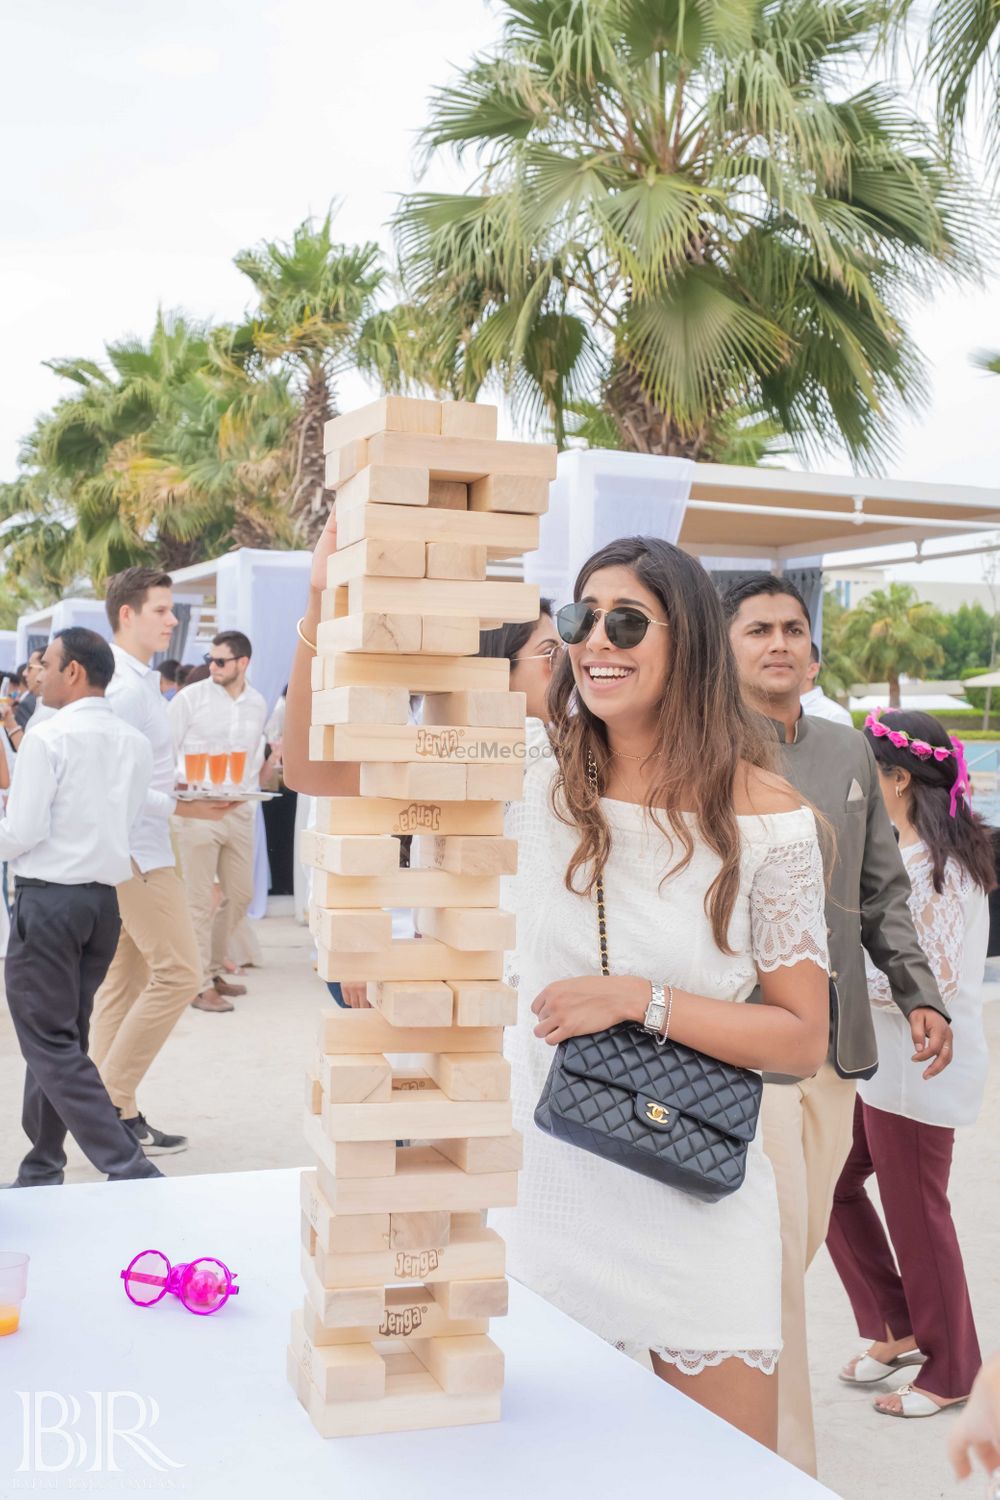 Photo of Brunch idea and games giant jenga